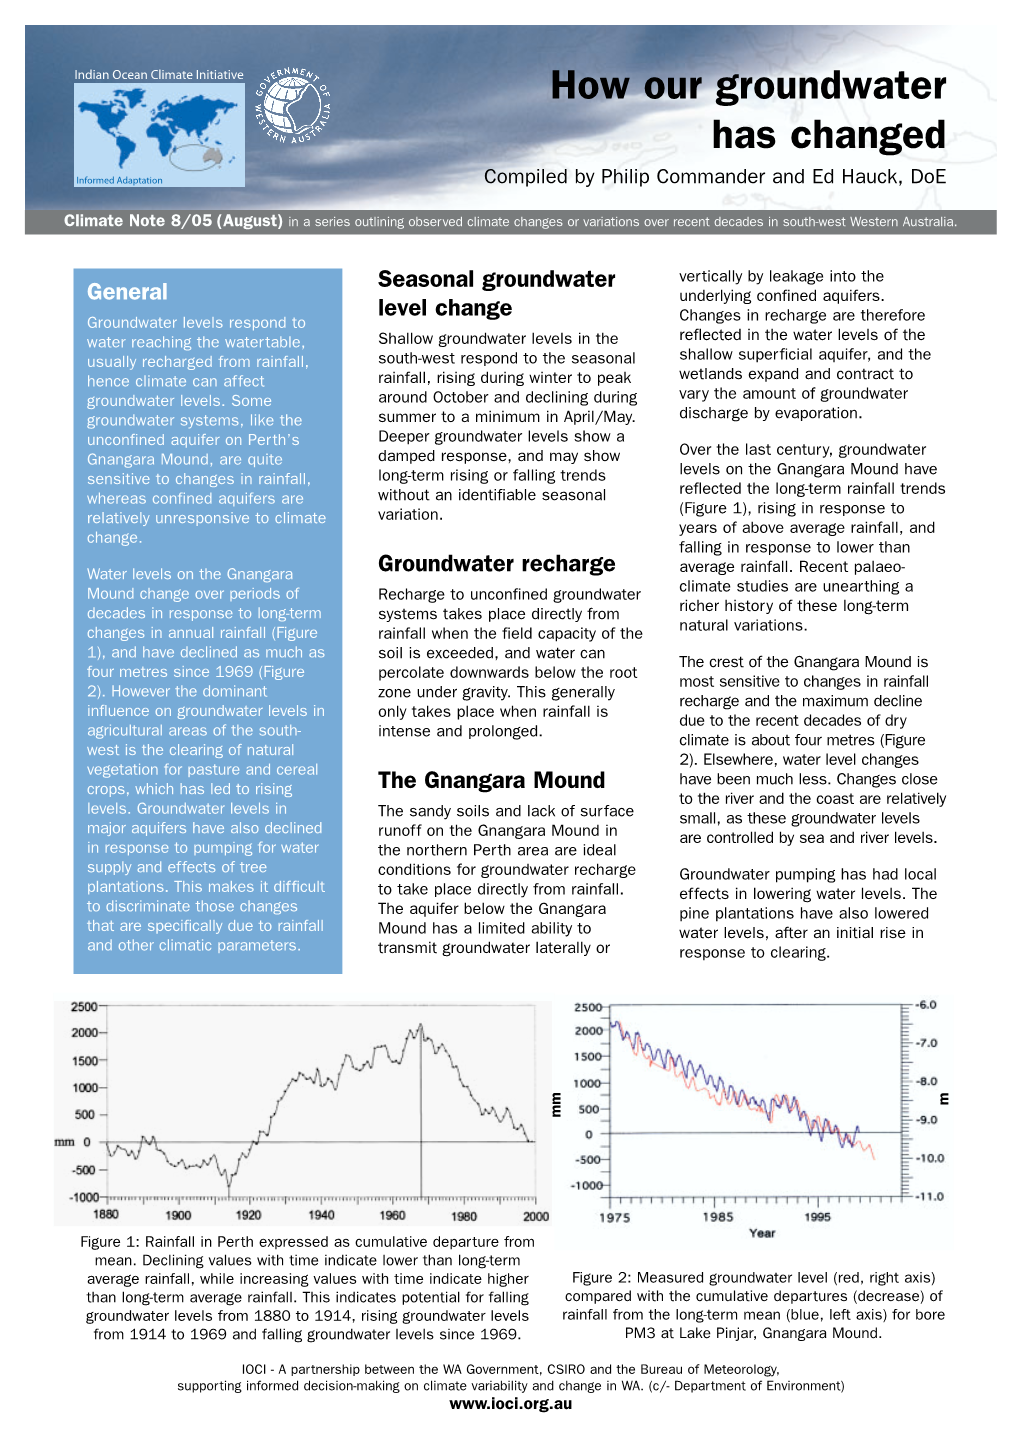 How Our Groundwater Has Changed Compiled by Philip Commander and Ed Hauck, Doe